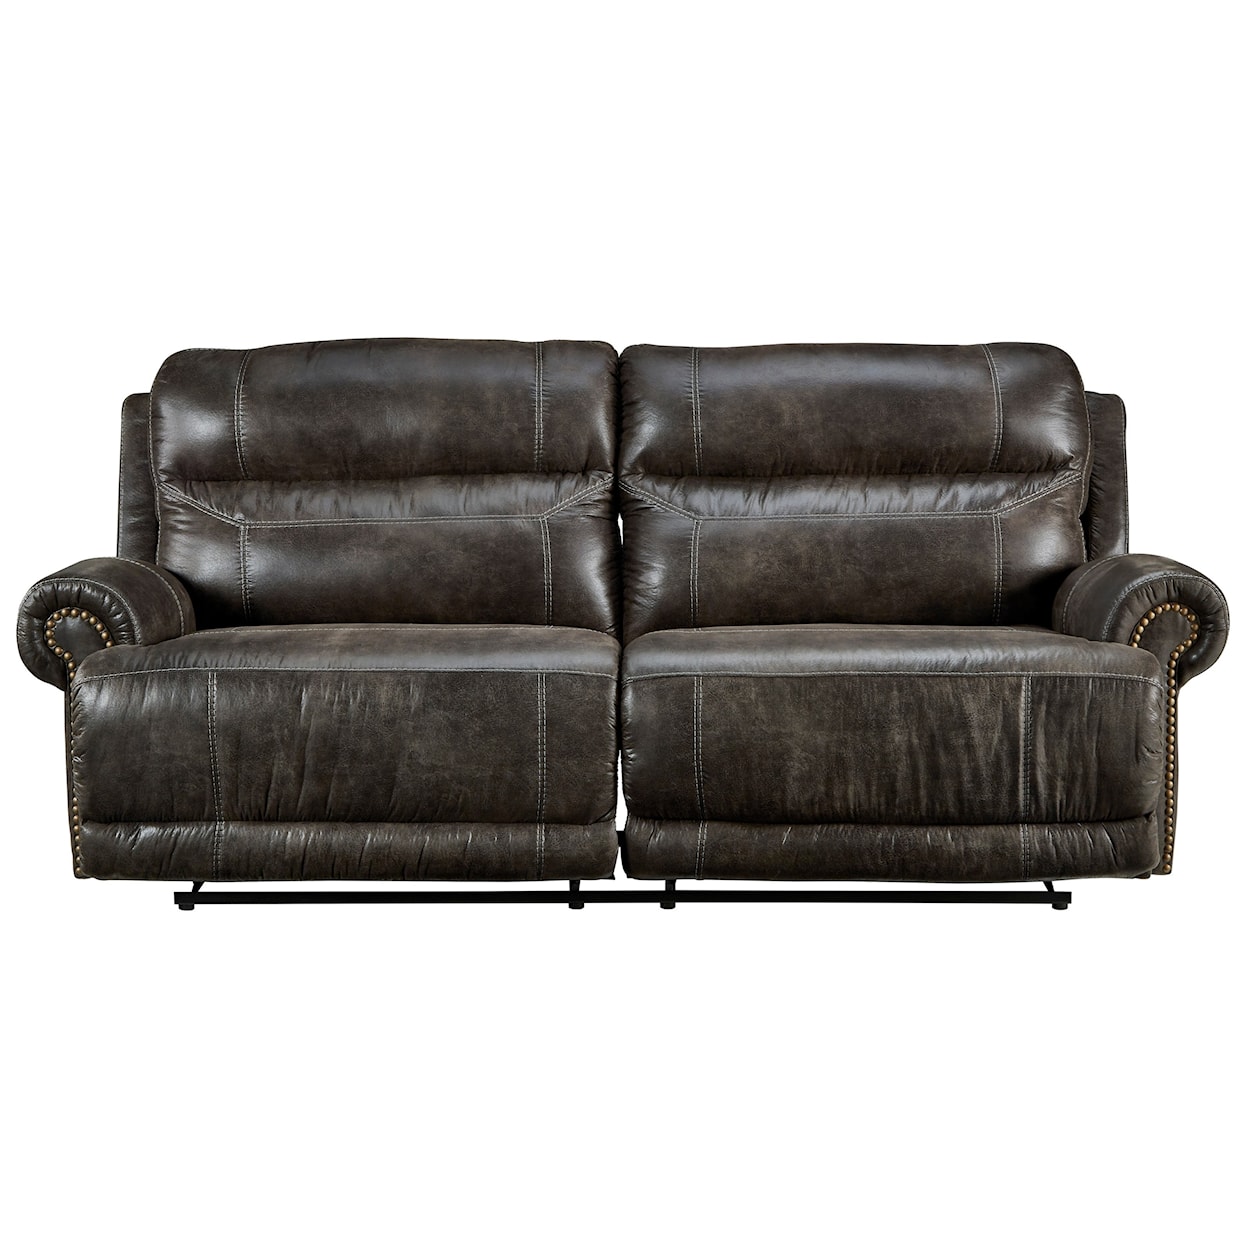 Signature Design by Ashley Grearview Power Reclining Sofa